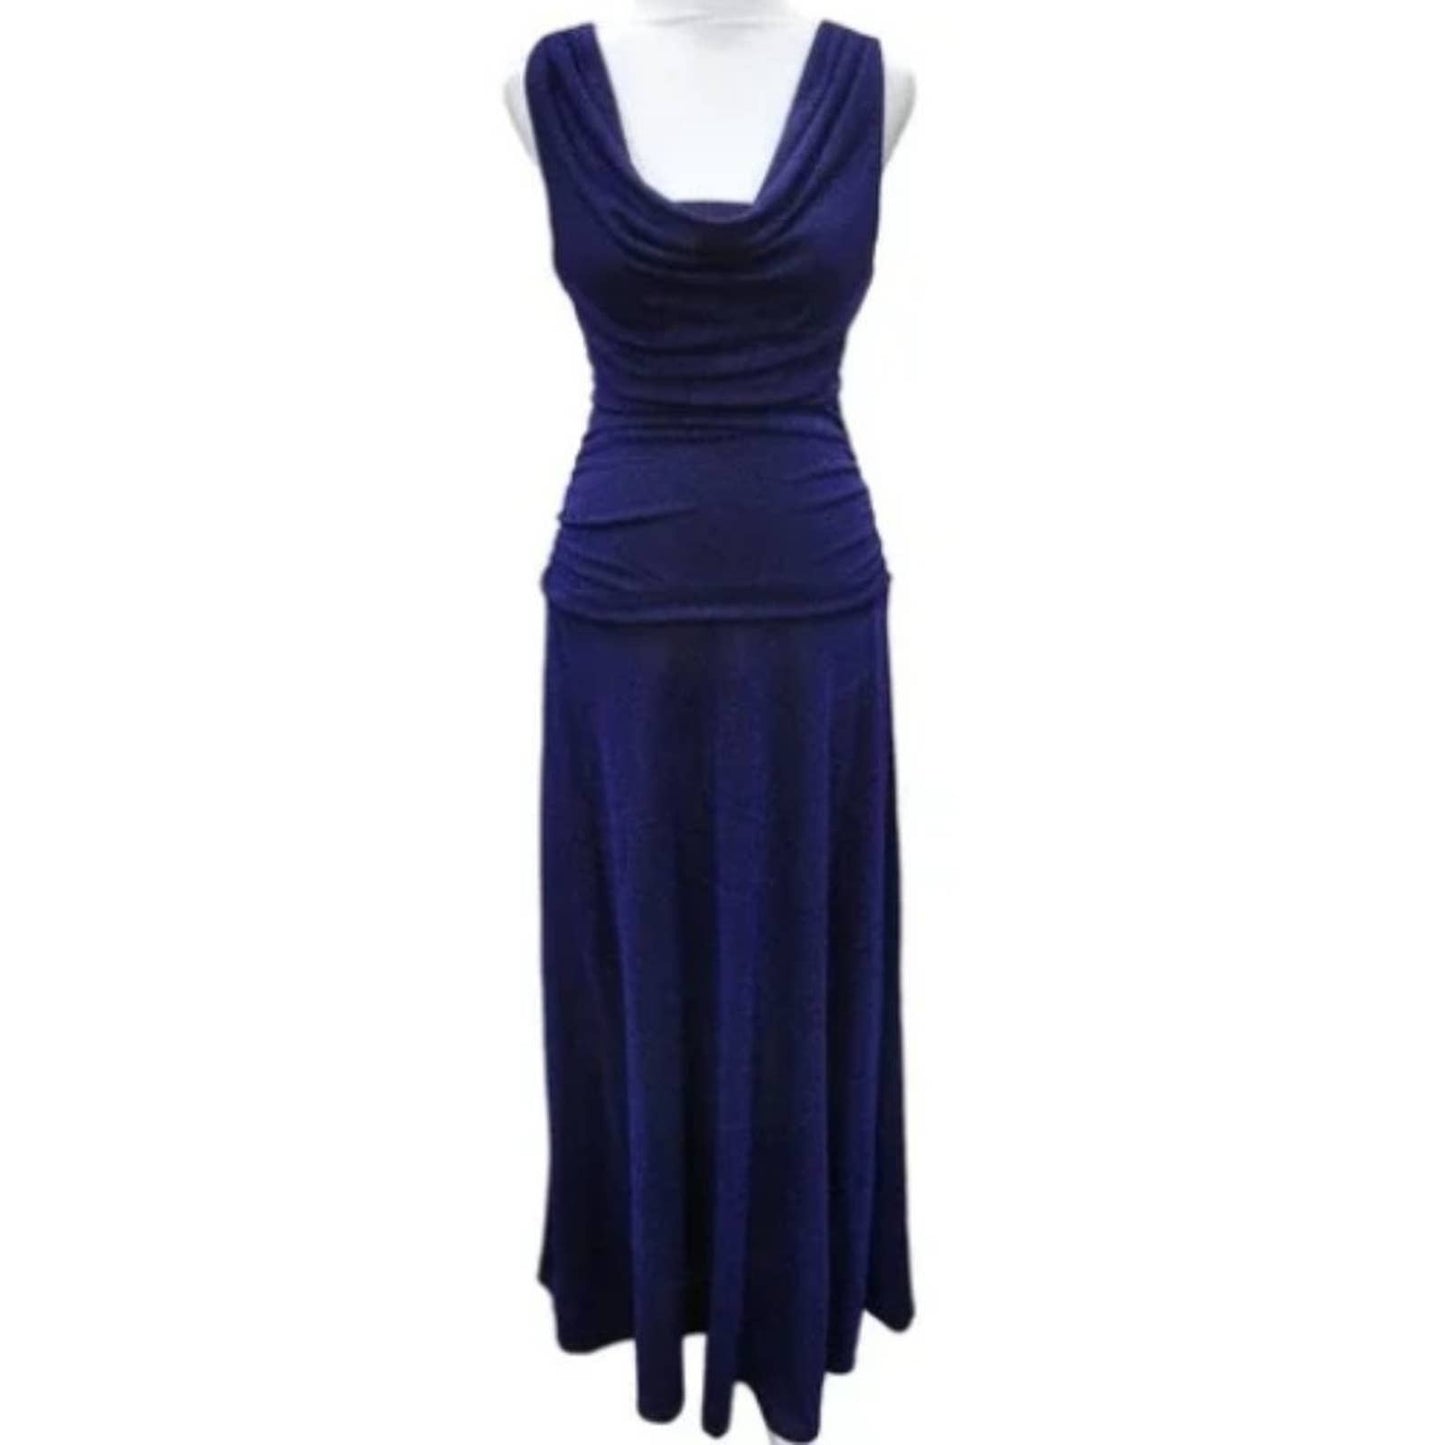 Nightway Navy Blue Ruched Formal Gown Mother of the Bride NWT Size 10